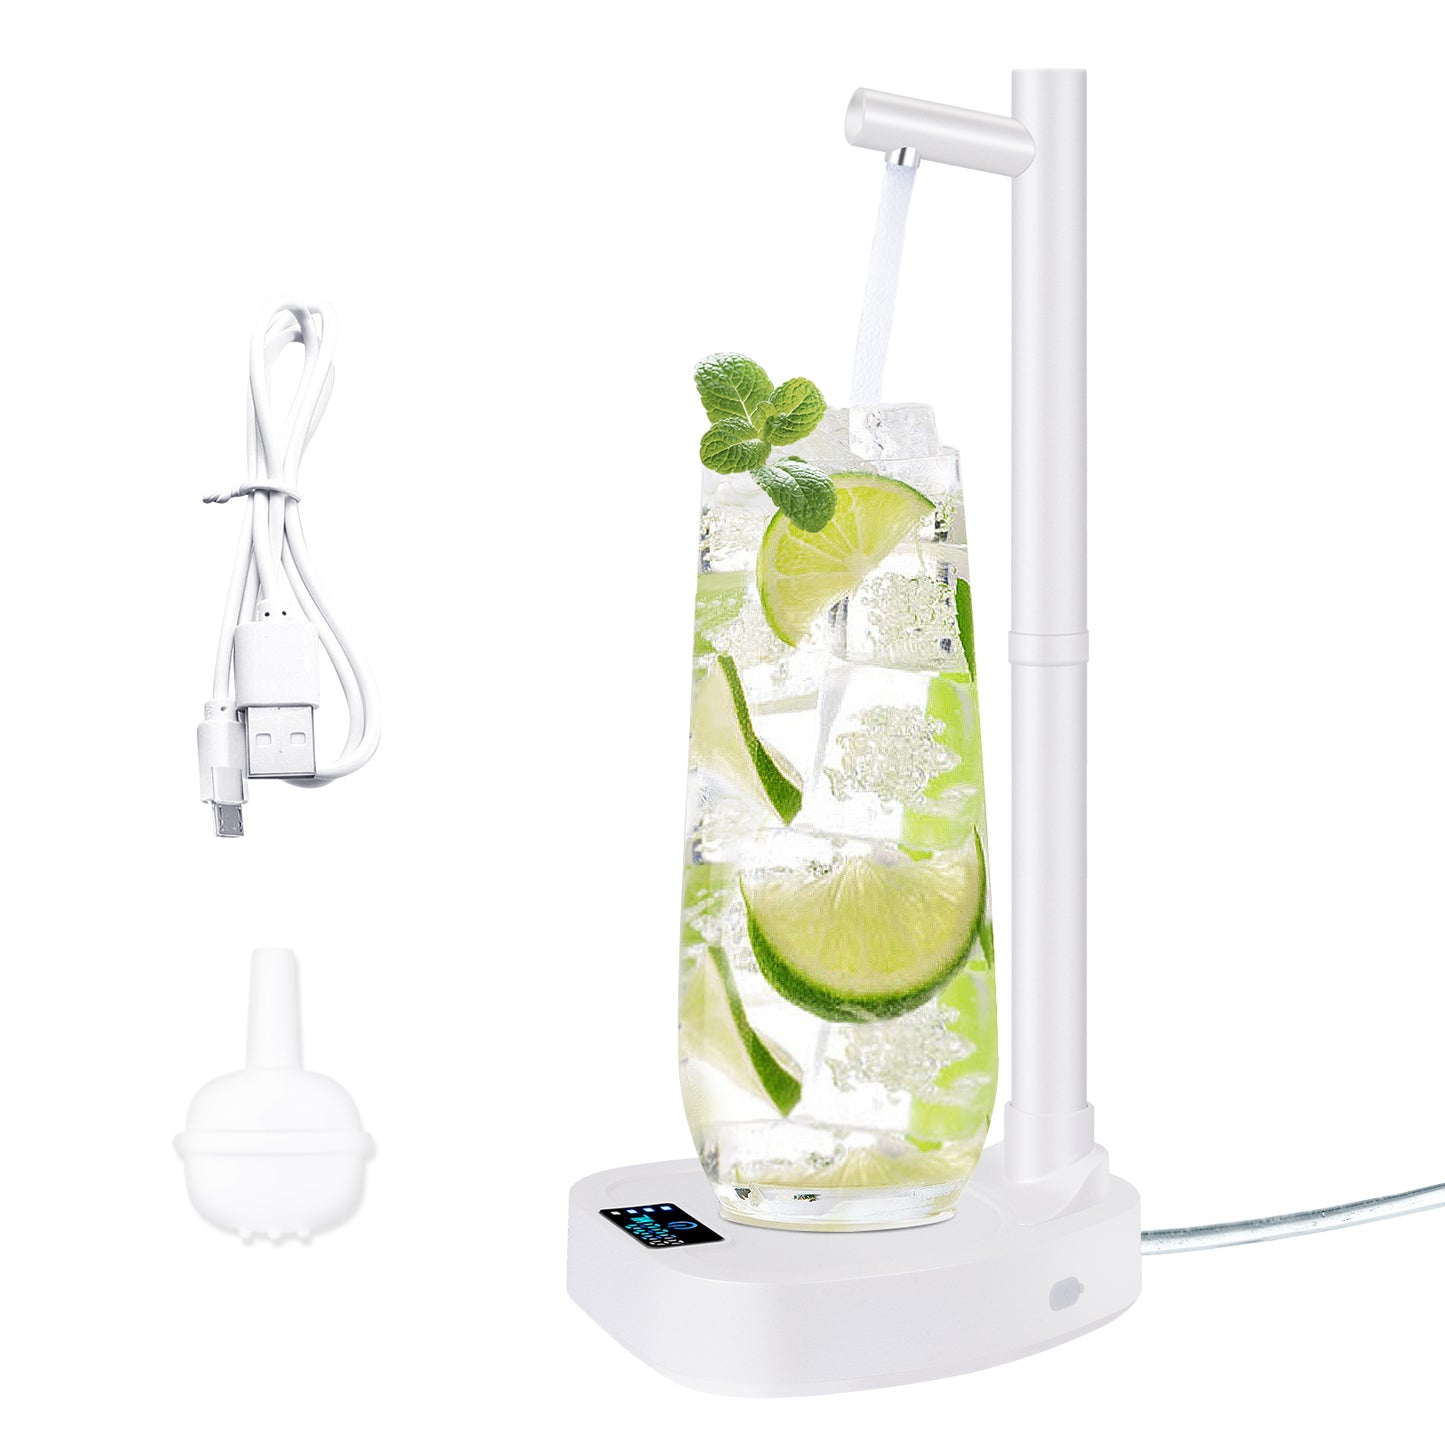 Smart Automatic Desktop Water Dispenser: Rechargeable, Portable, with Extended Tube and Stand for Easy Bottle Refills